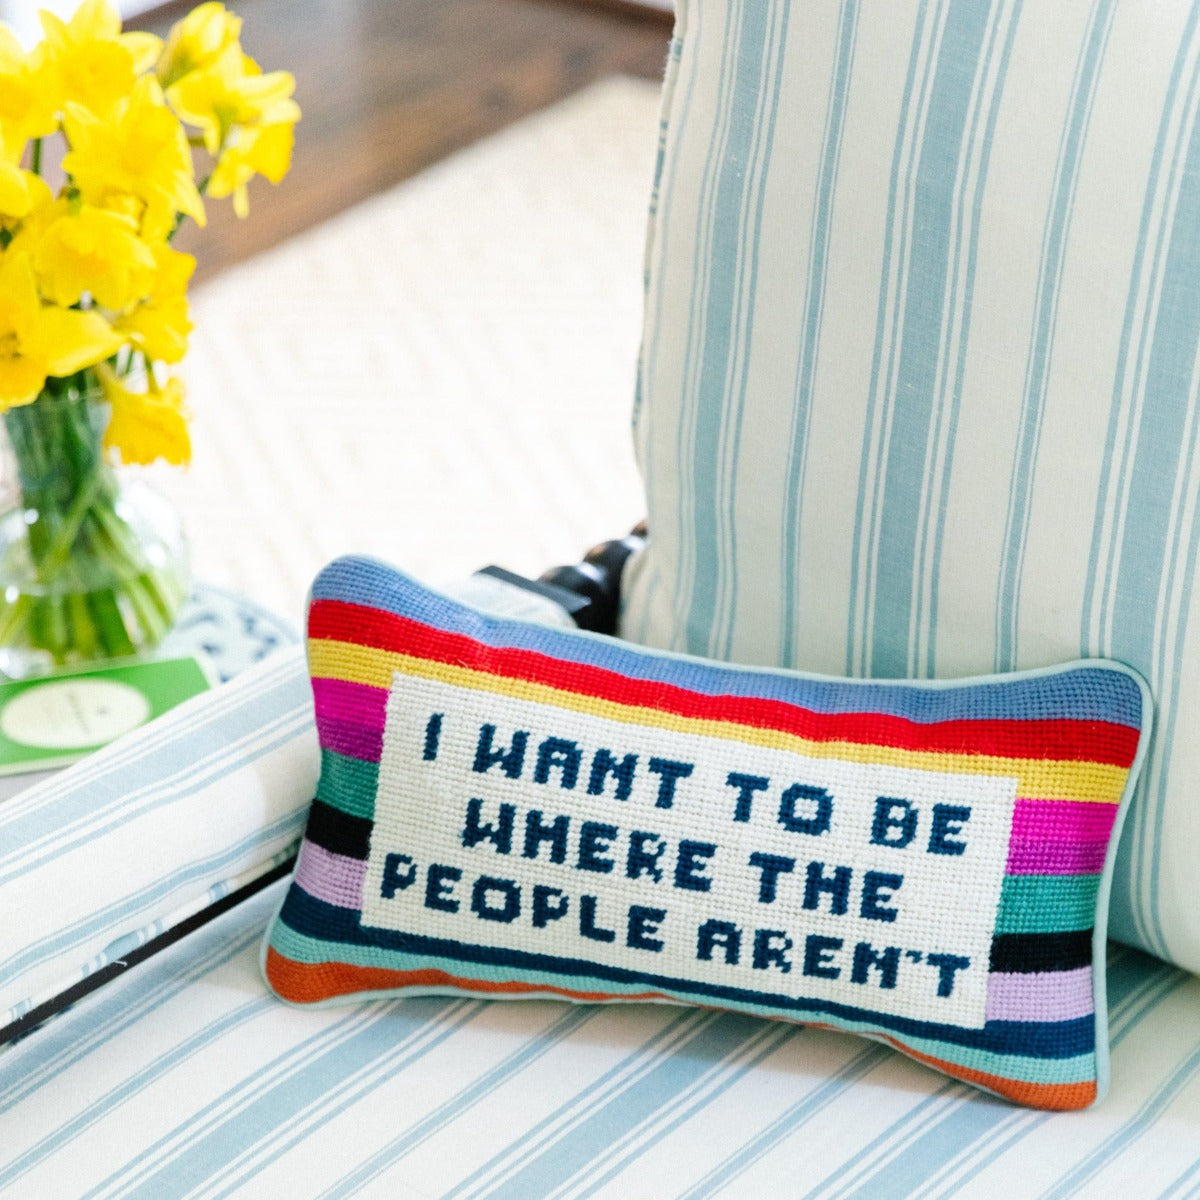 I Want to be Where the People Aren't Needlepoint Pillow